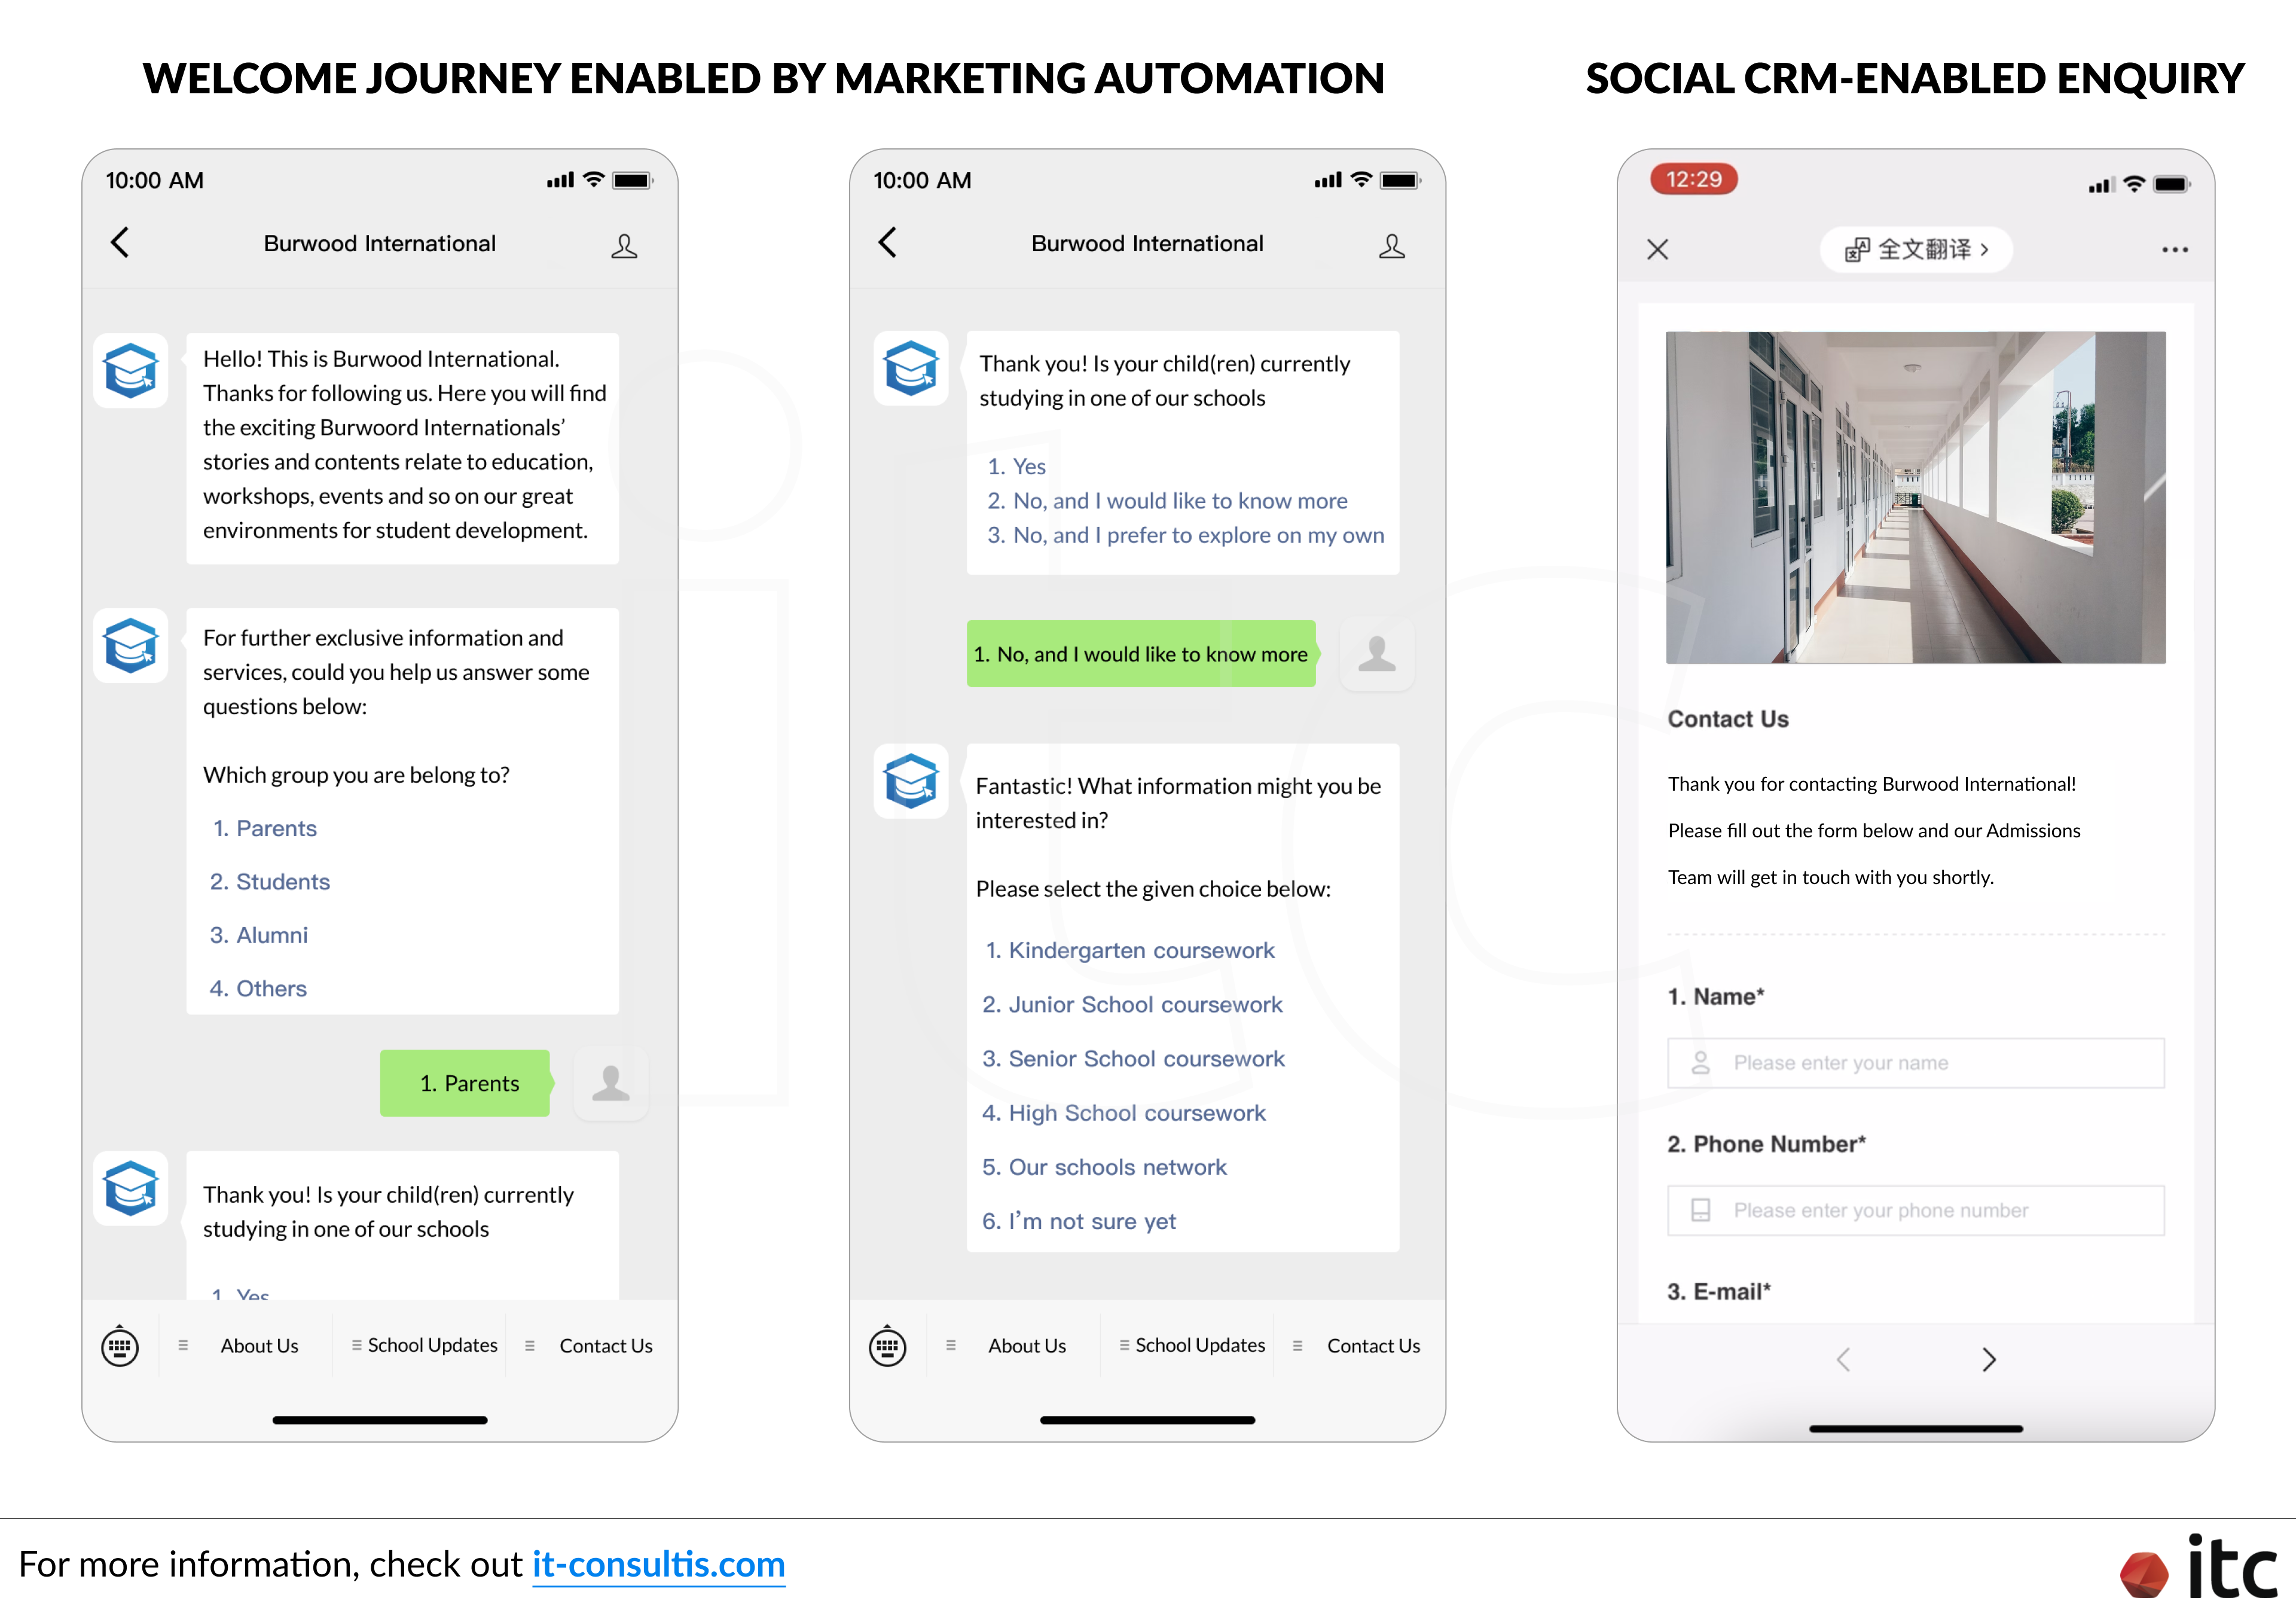 Marketing Automation and Social CRM intiatives for a leading education group to improve lead generation (student recruitment) in China